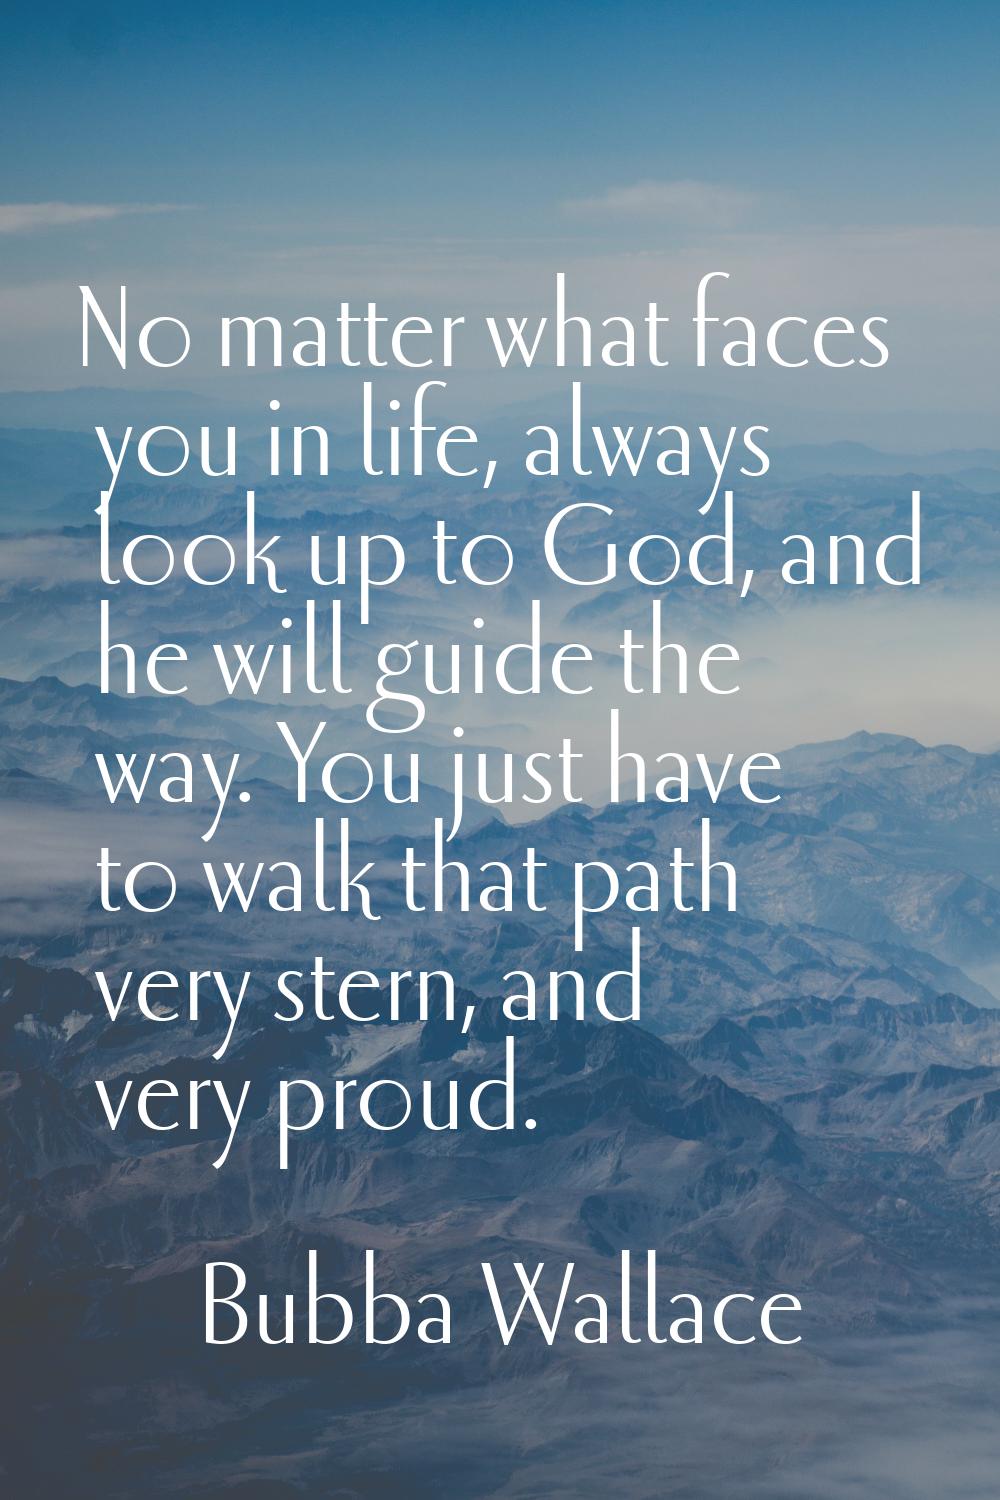 No matter what faces you in life, always look up to God, and he will guide the way. You just have t